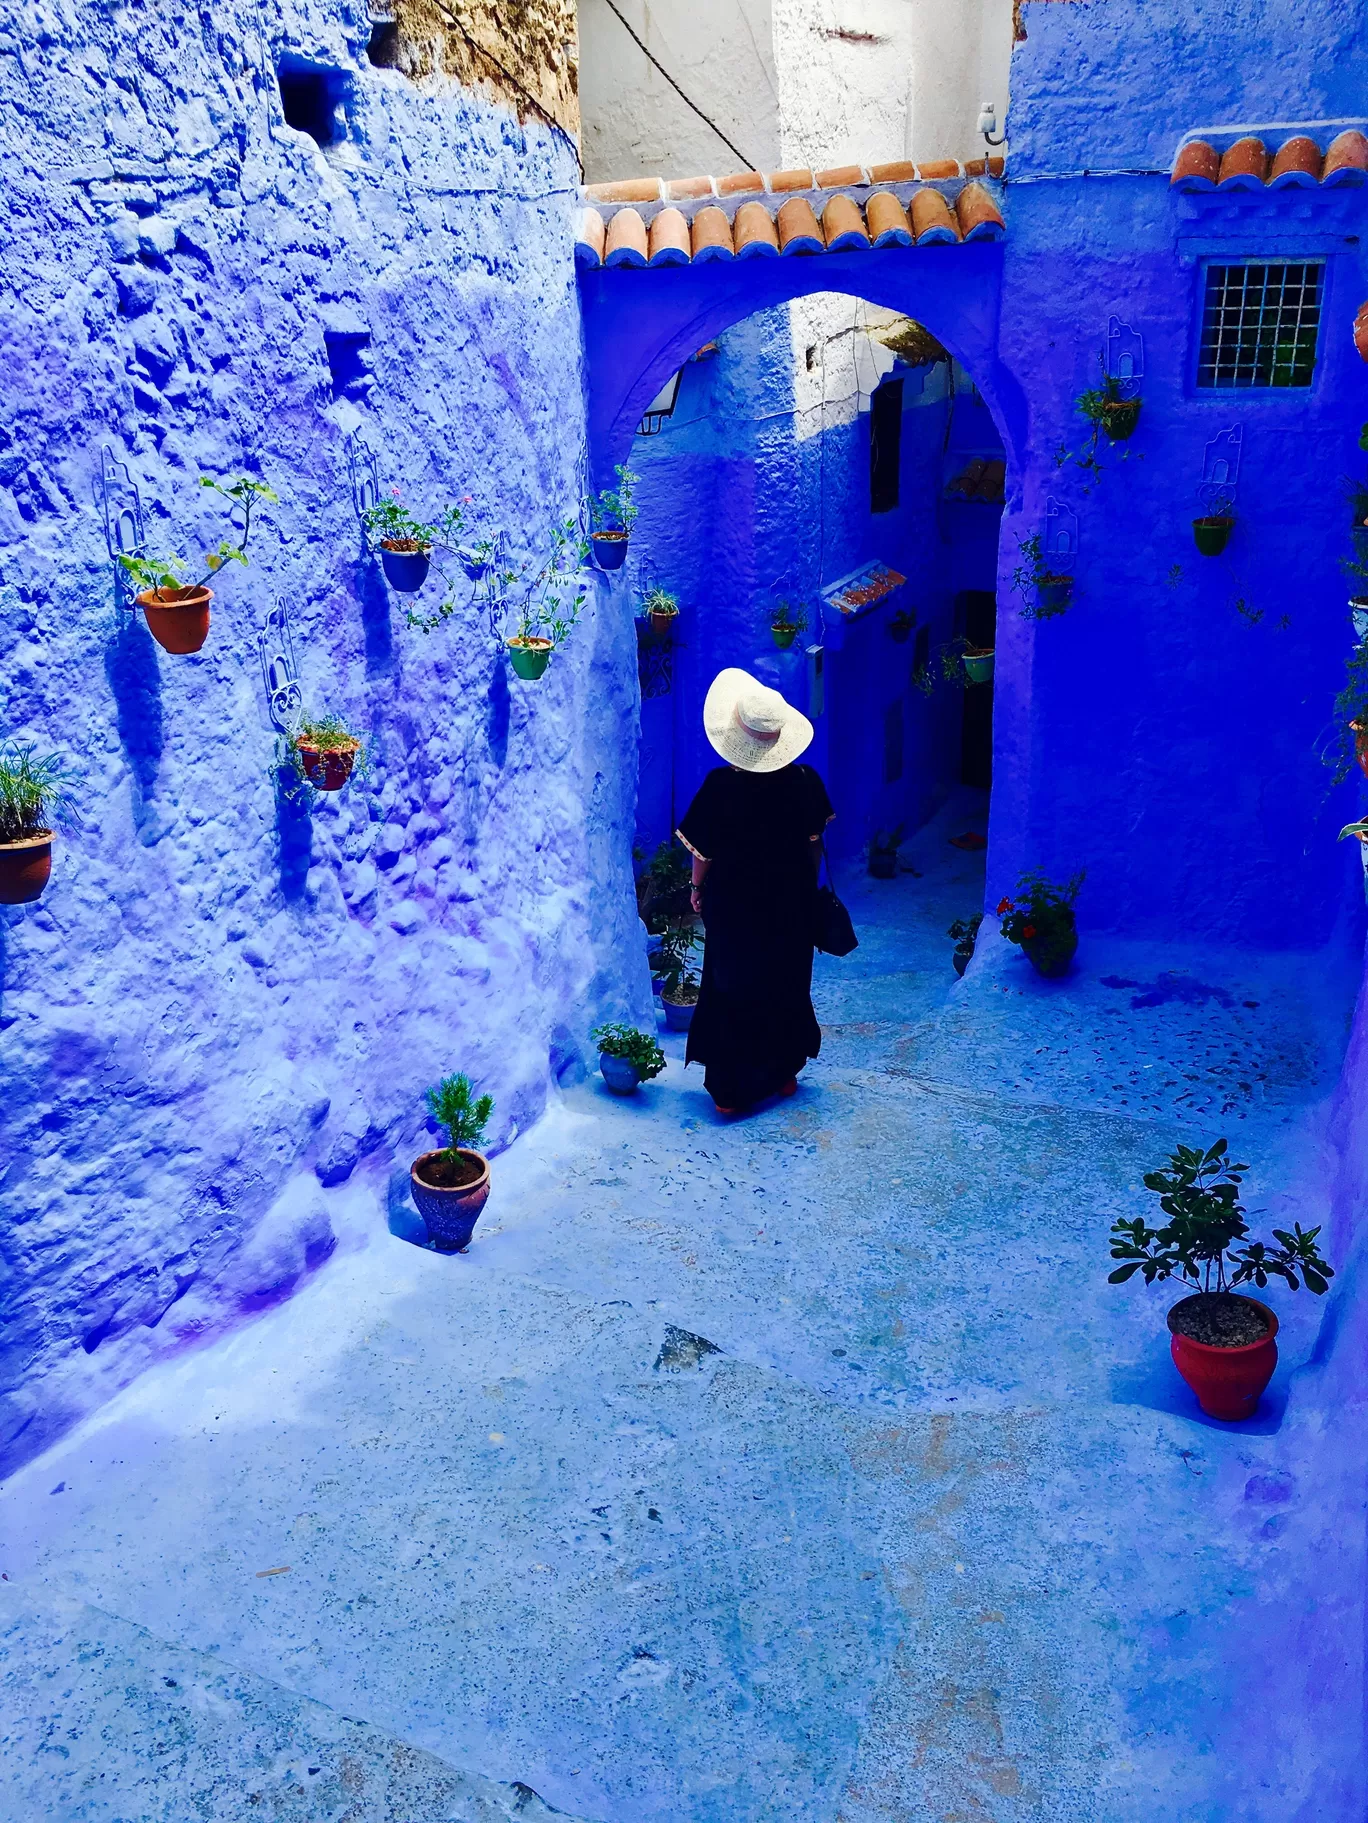 Photo of Chefchaouen By Ipsa S Yadav